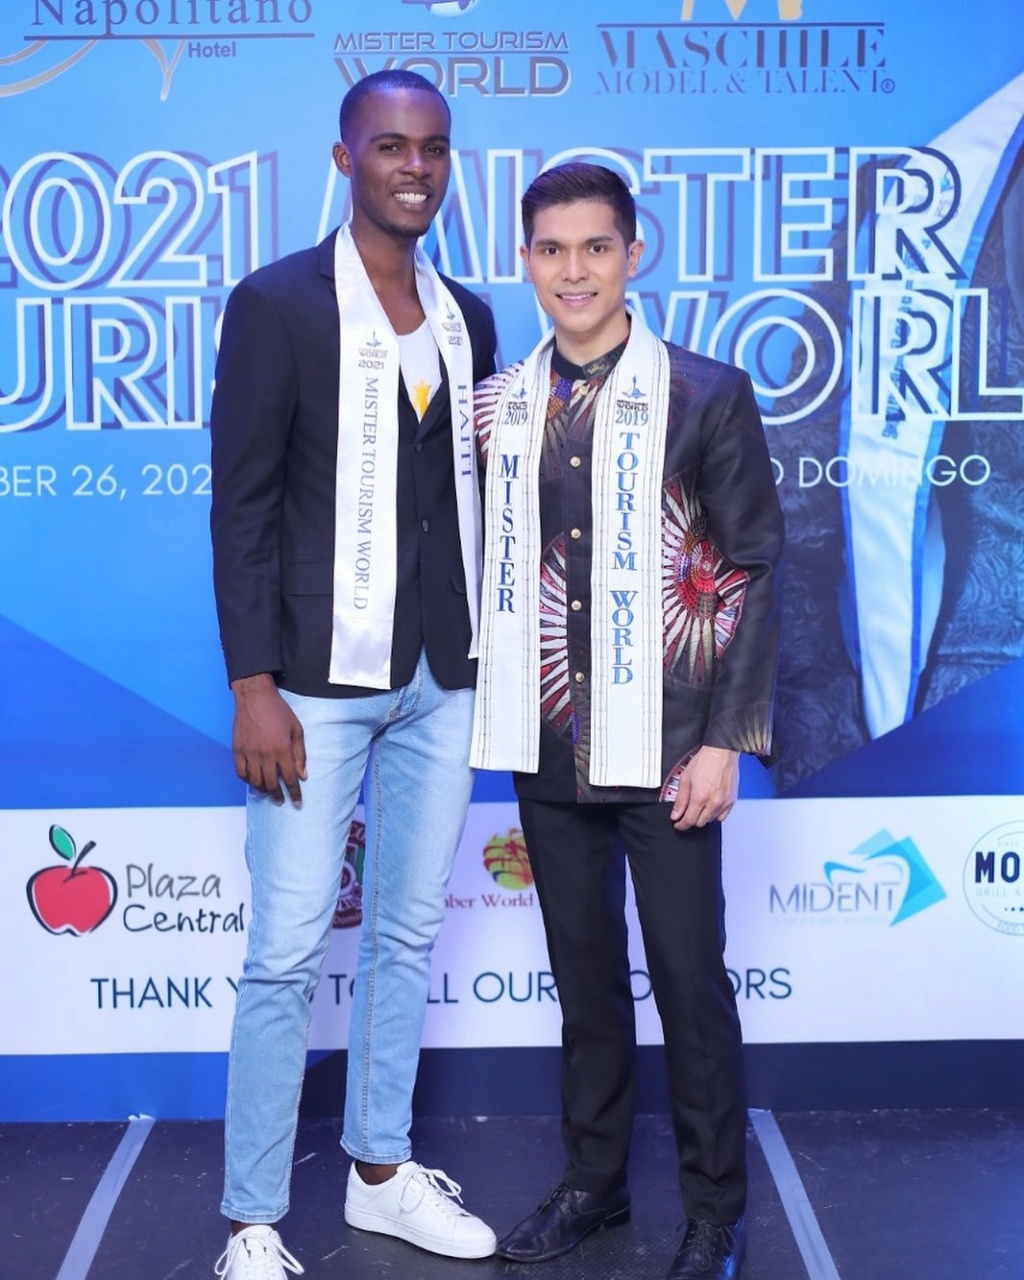 5th Mister Tourism World 2020/2021 is Dominican Republic - Page 2 26129412